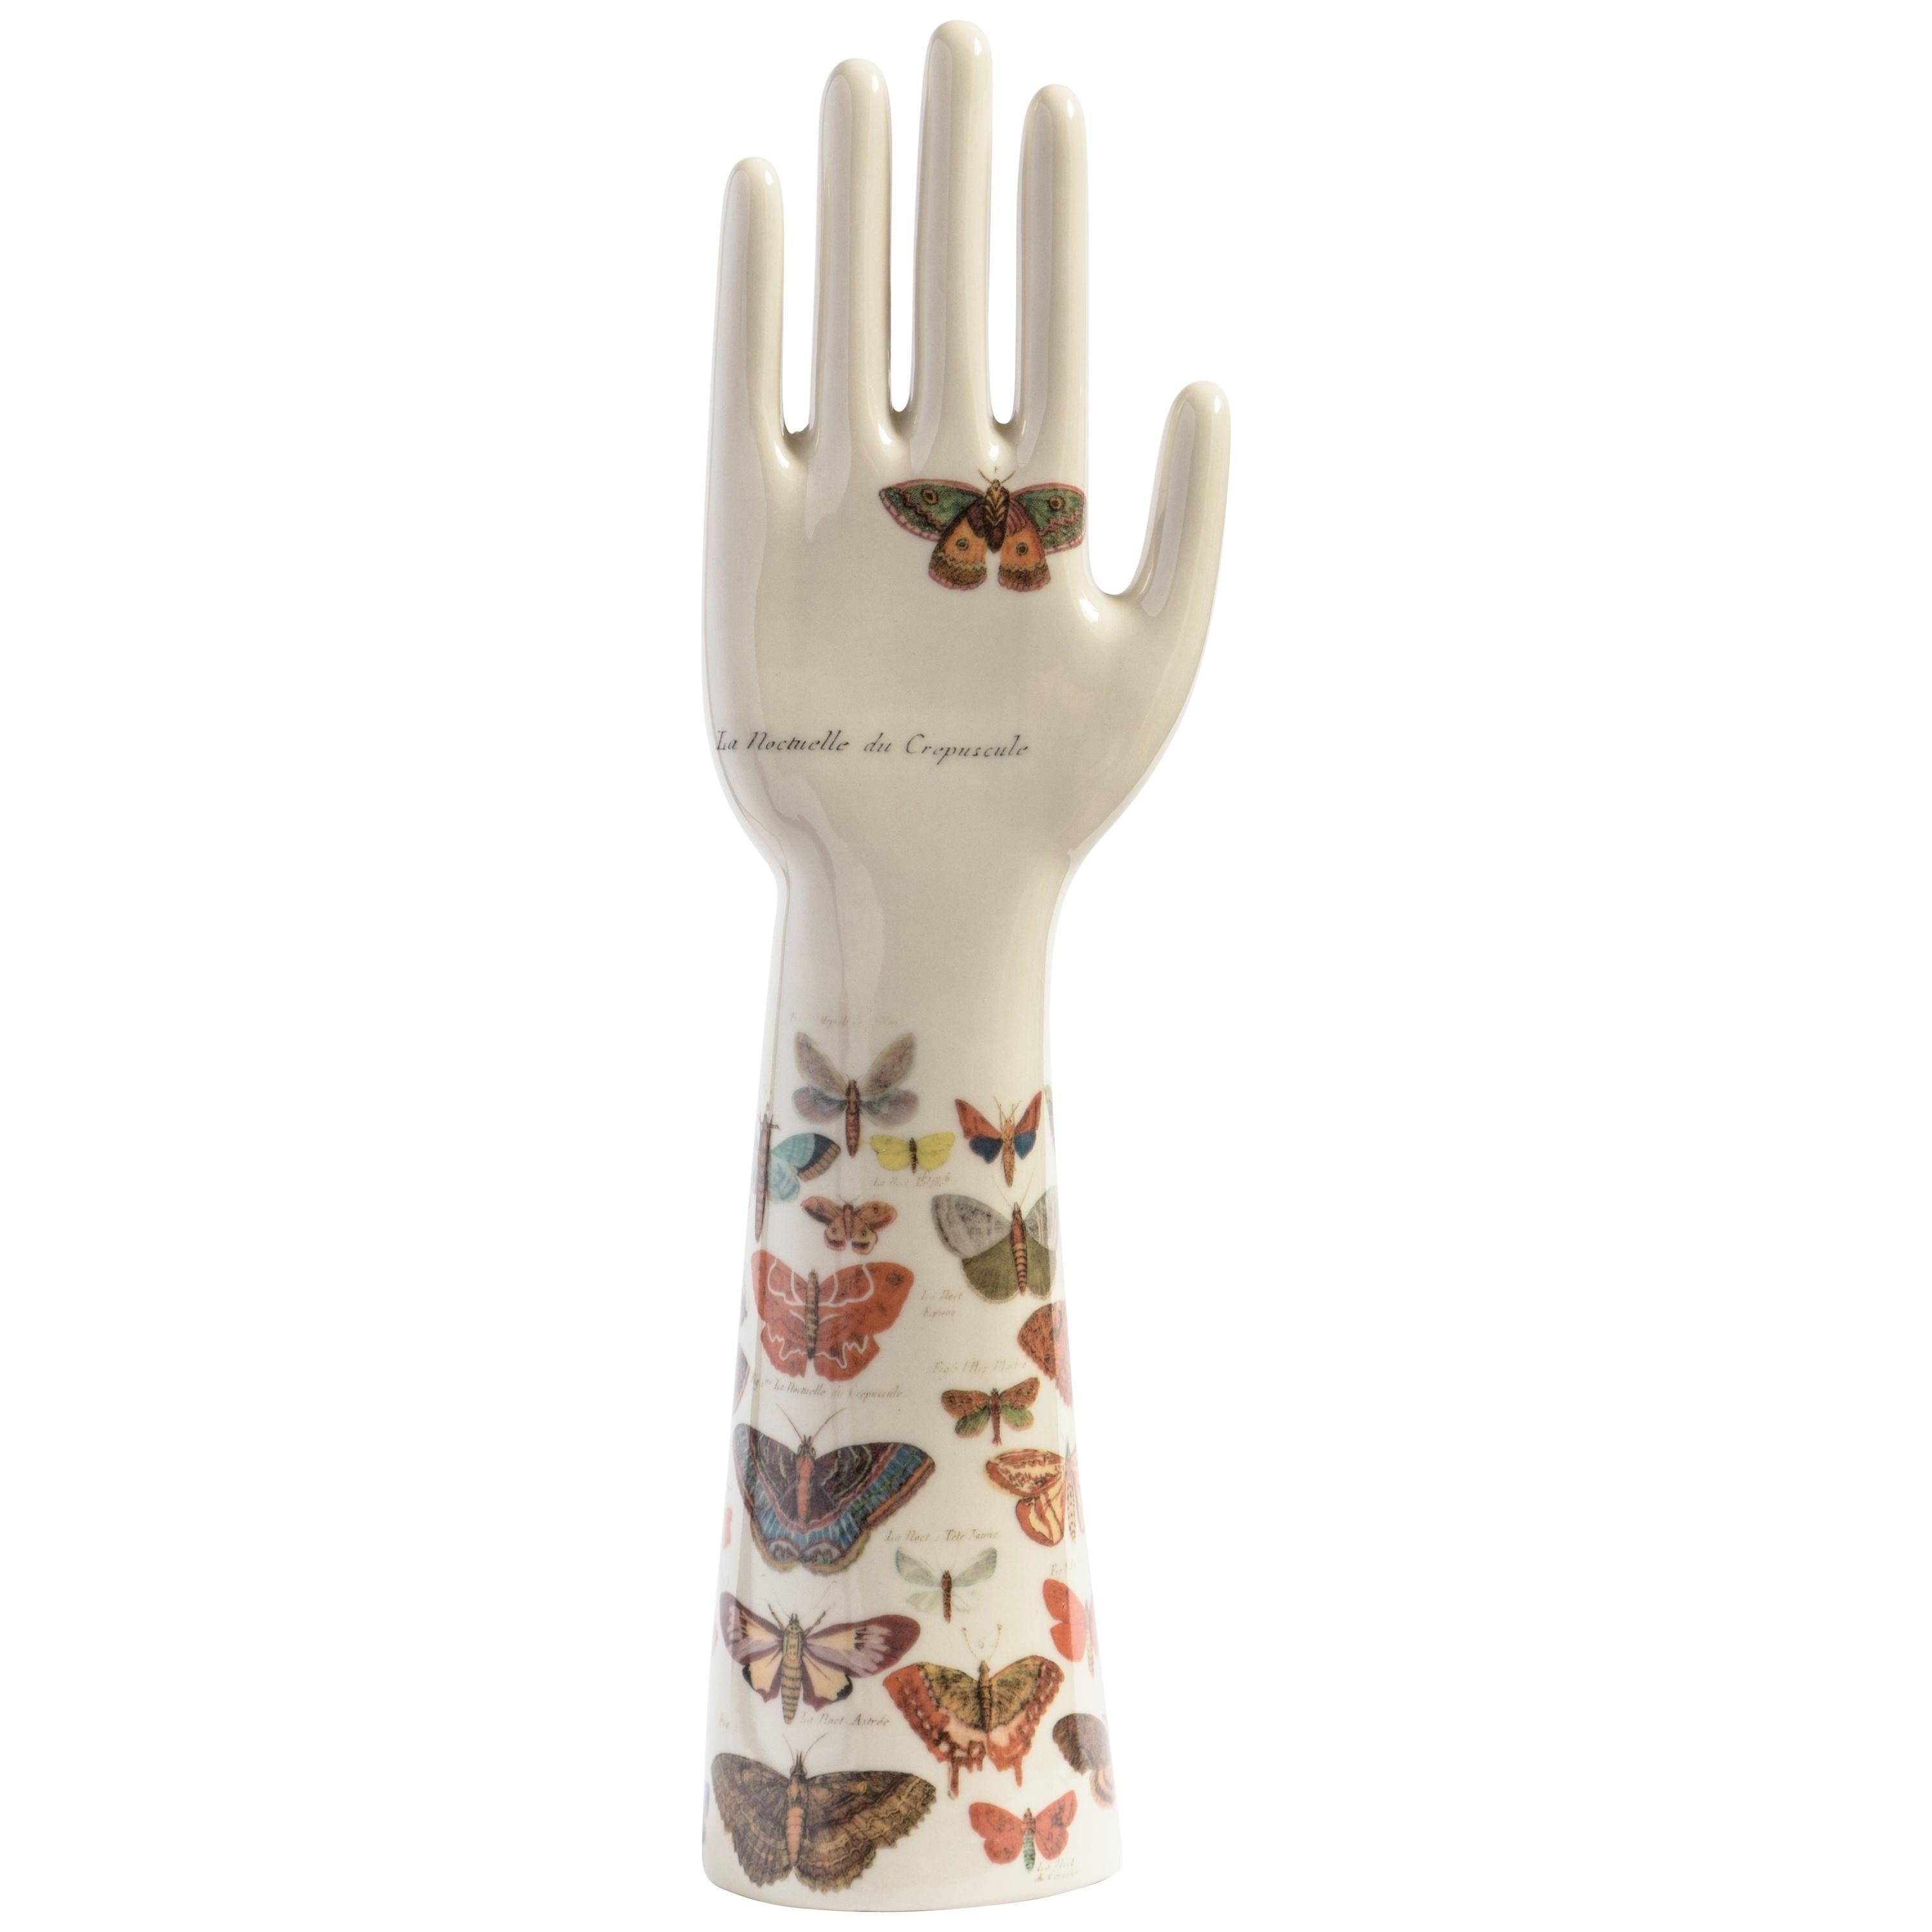 Anatomica, Porcelain Hand with Butterflies Decoration by Vito Nesta